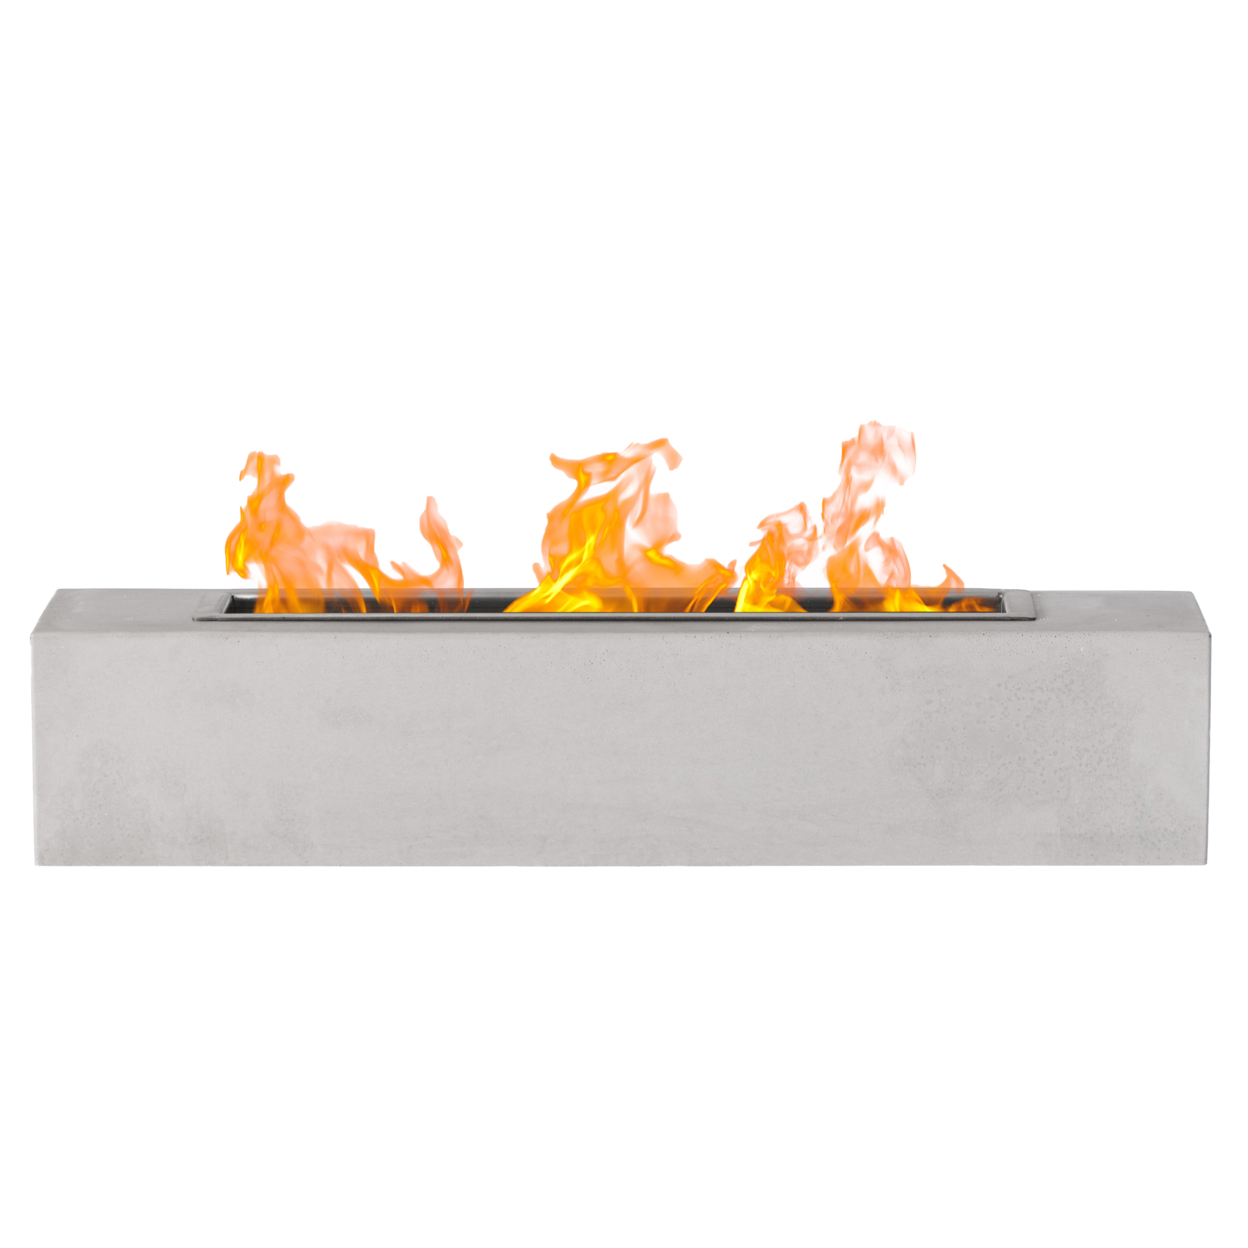 Mini Tabletop Fire Pit Rubbing Alcohol Fireplace Indoor Outdoor Portable Fire Concrete Bowl Pot Fireplace - Rectangle